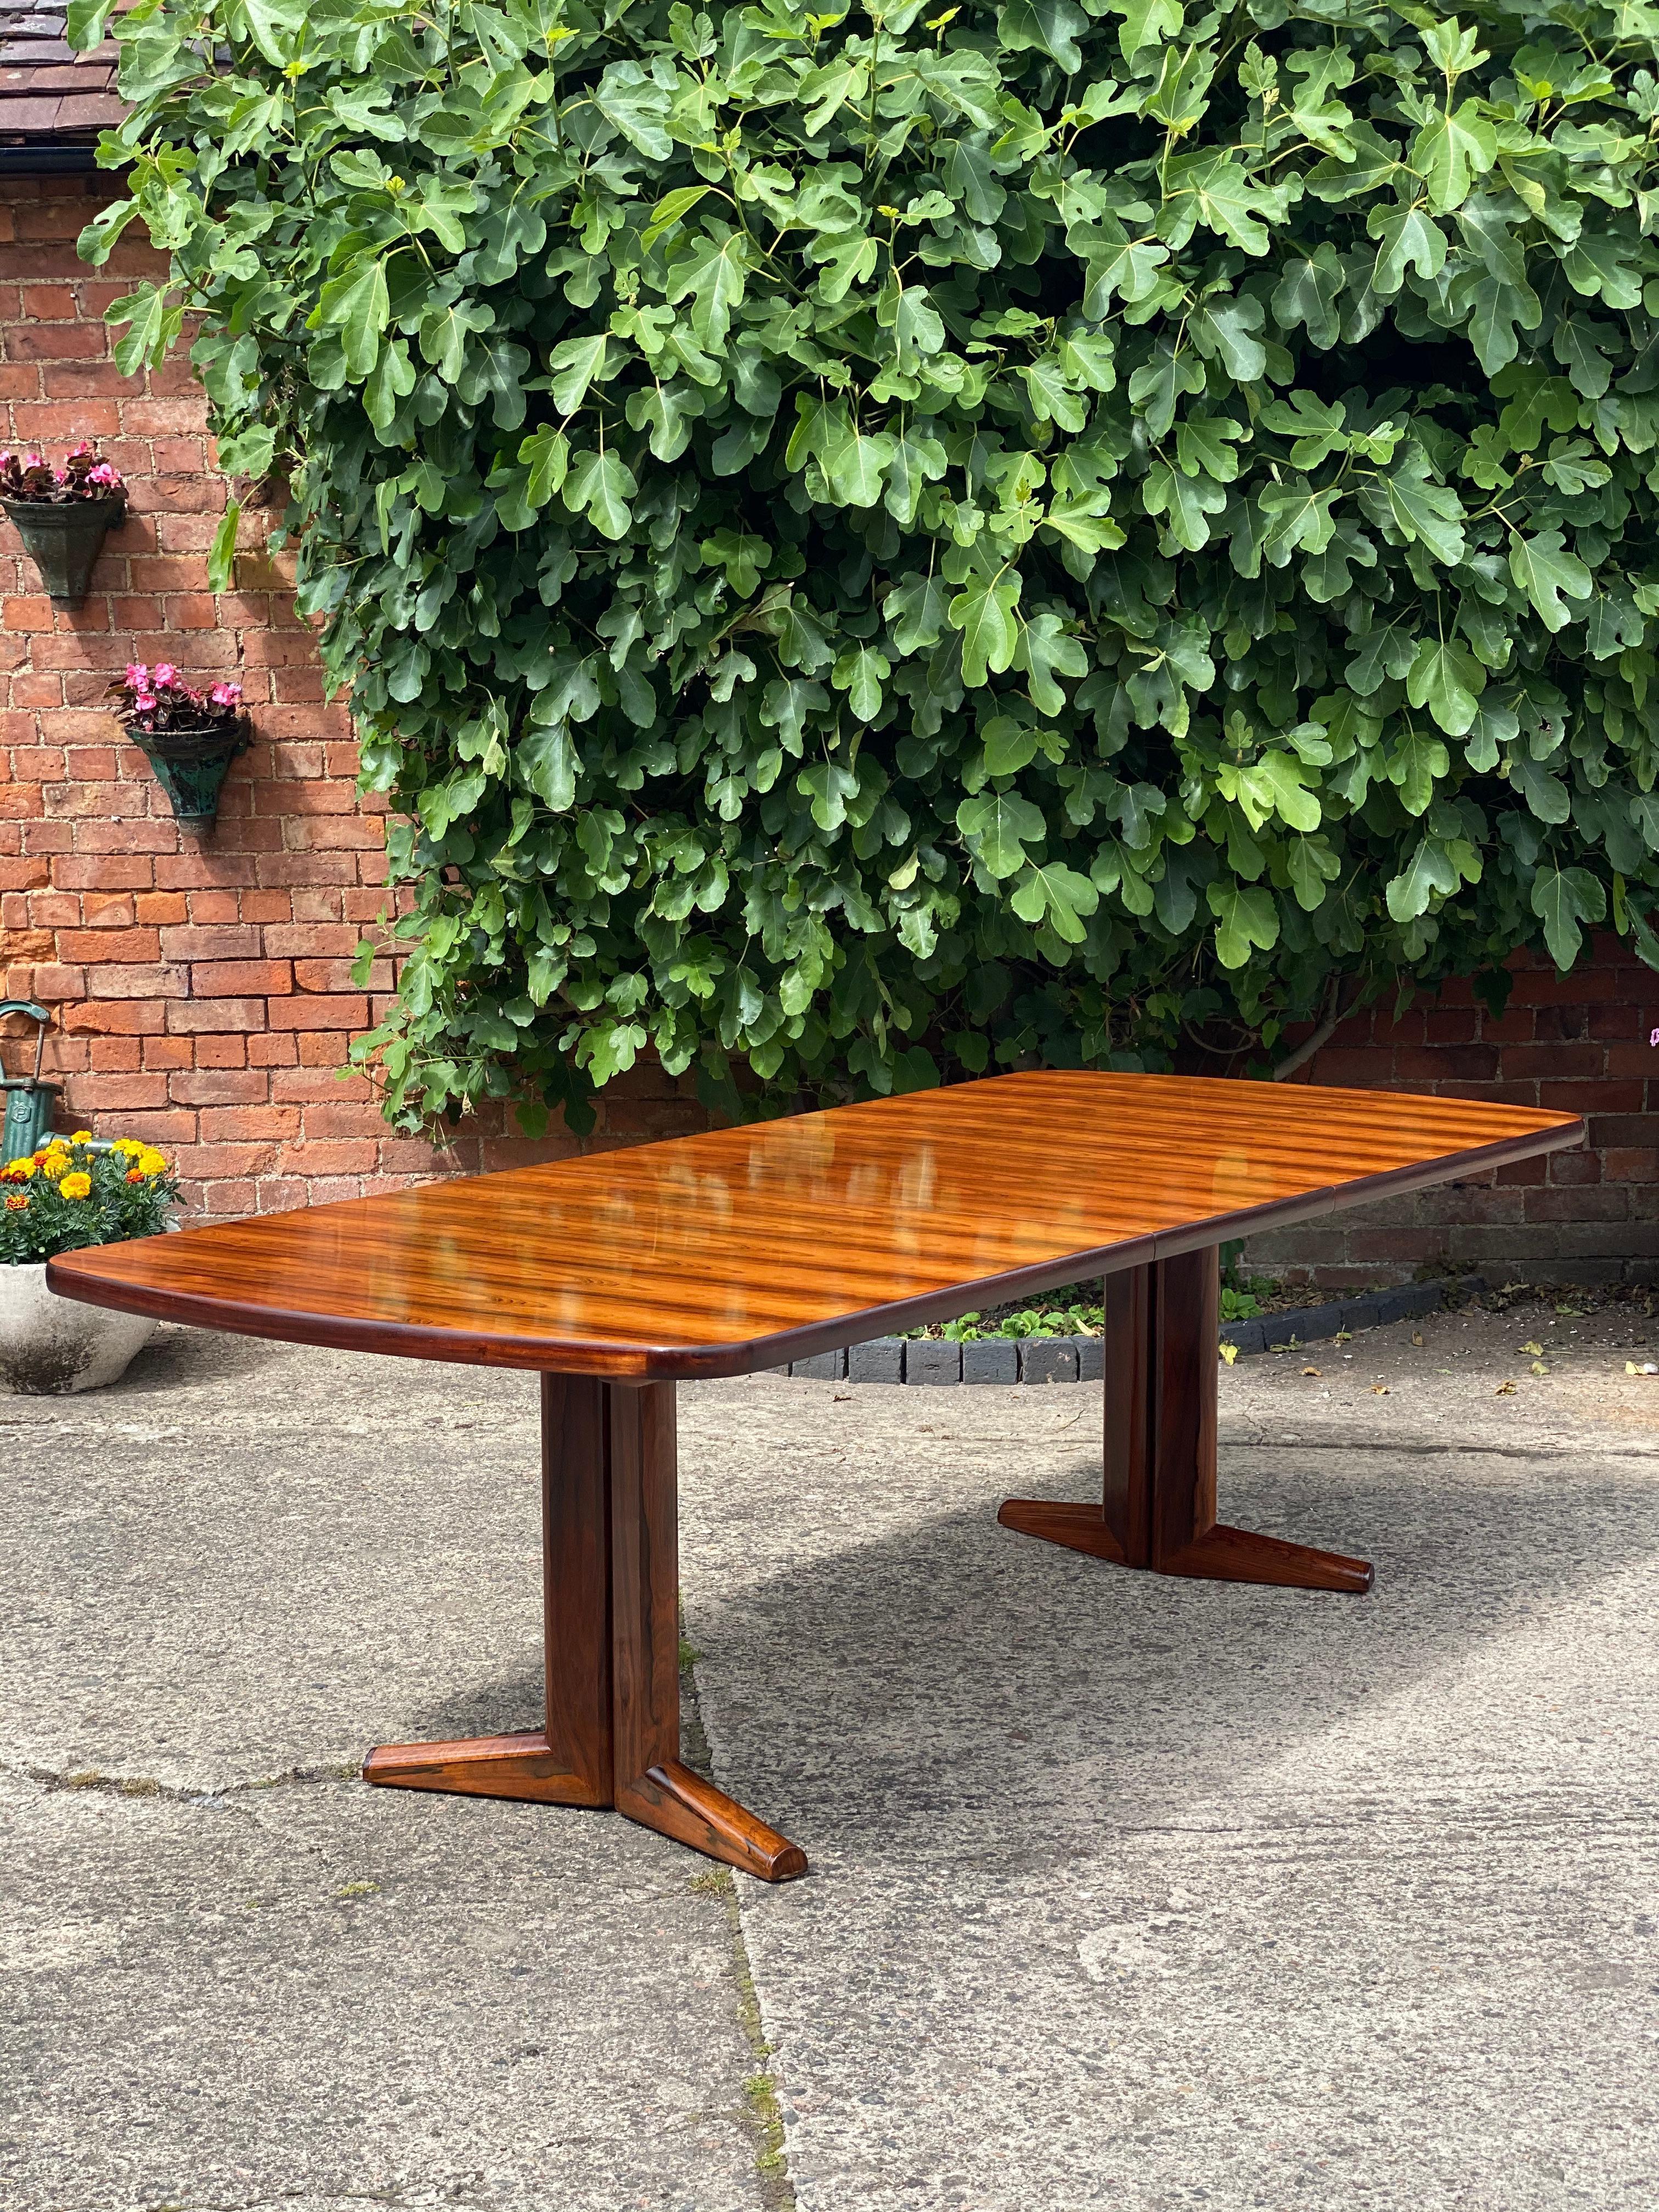 Gordon Russell rosewood dining table by Martin Hall Marwood Range, 1970.

Sublime Gordon Russell 'The Marwood Range' Rio Rosewood extending dining / boardroom table designed by Martin Hall for Gordon Russell Ltd of Broadway, Material: Figured